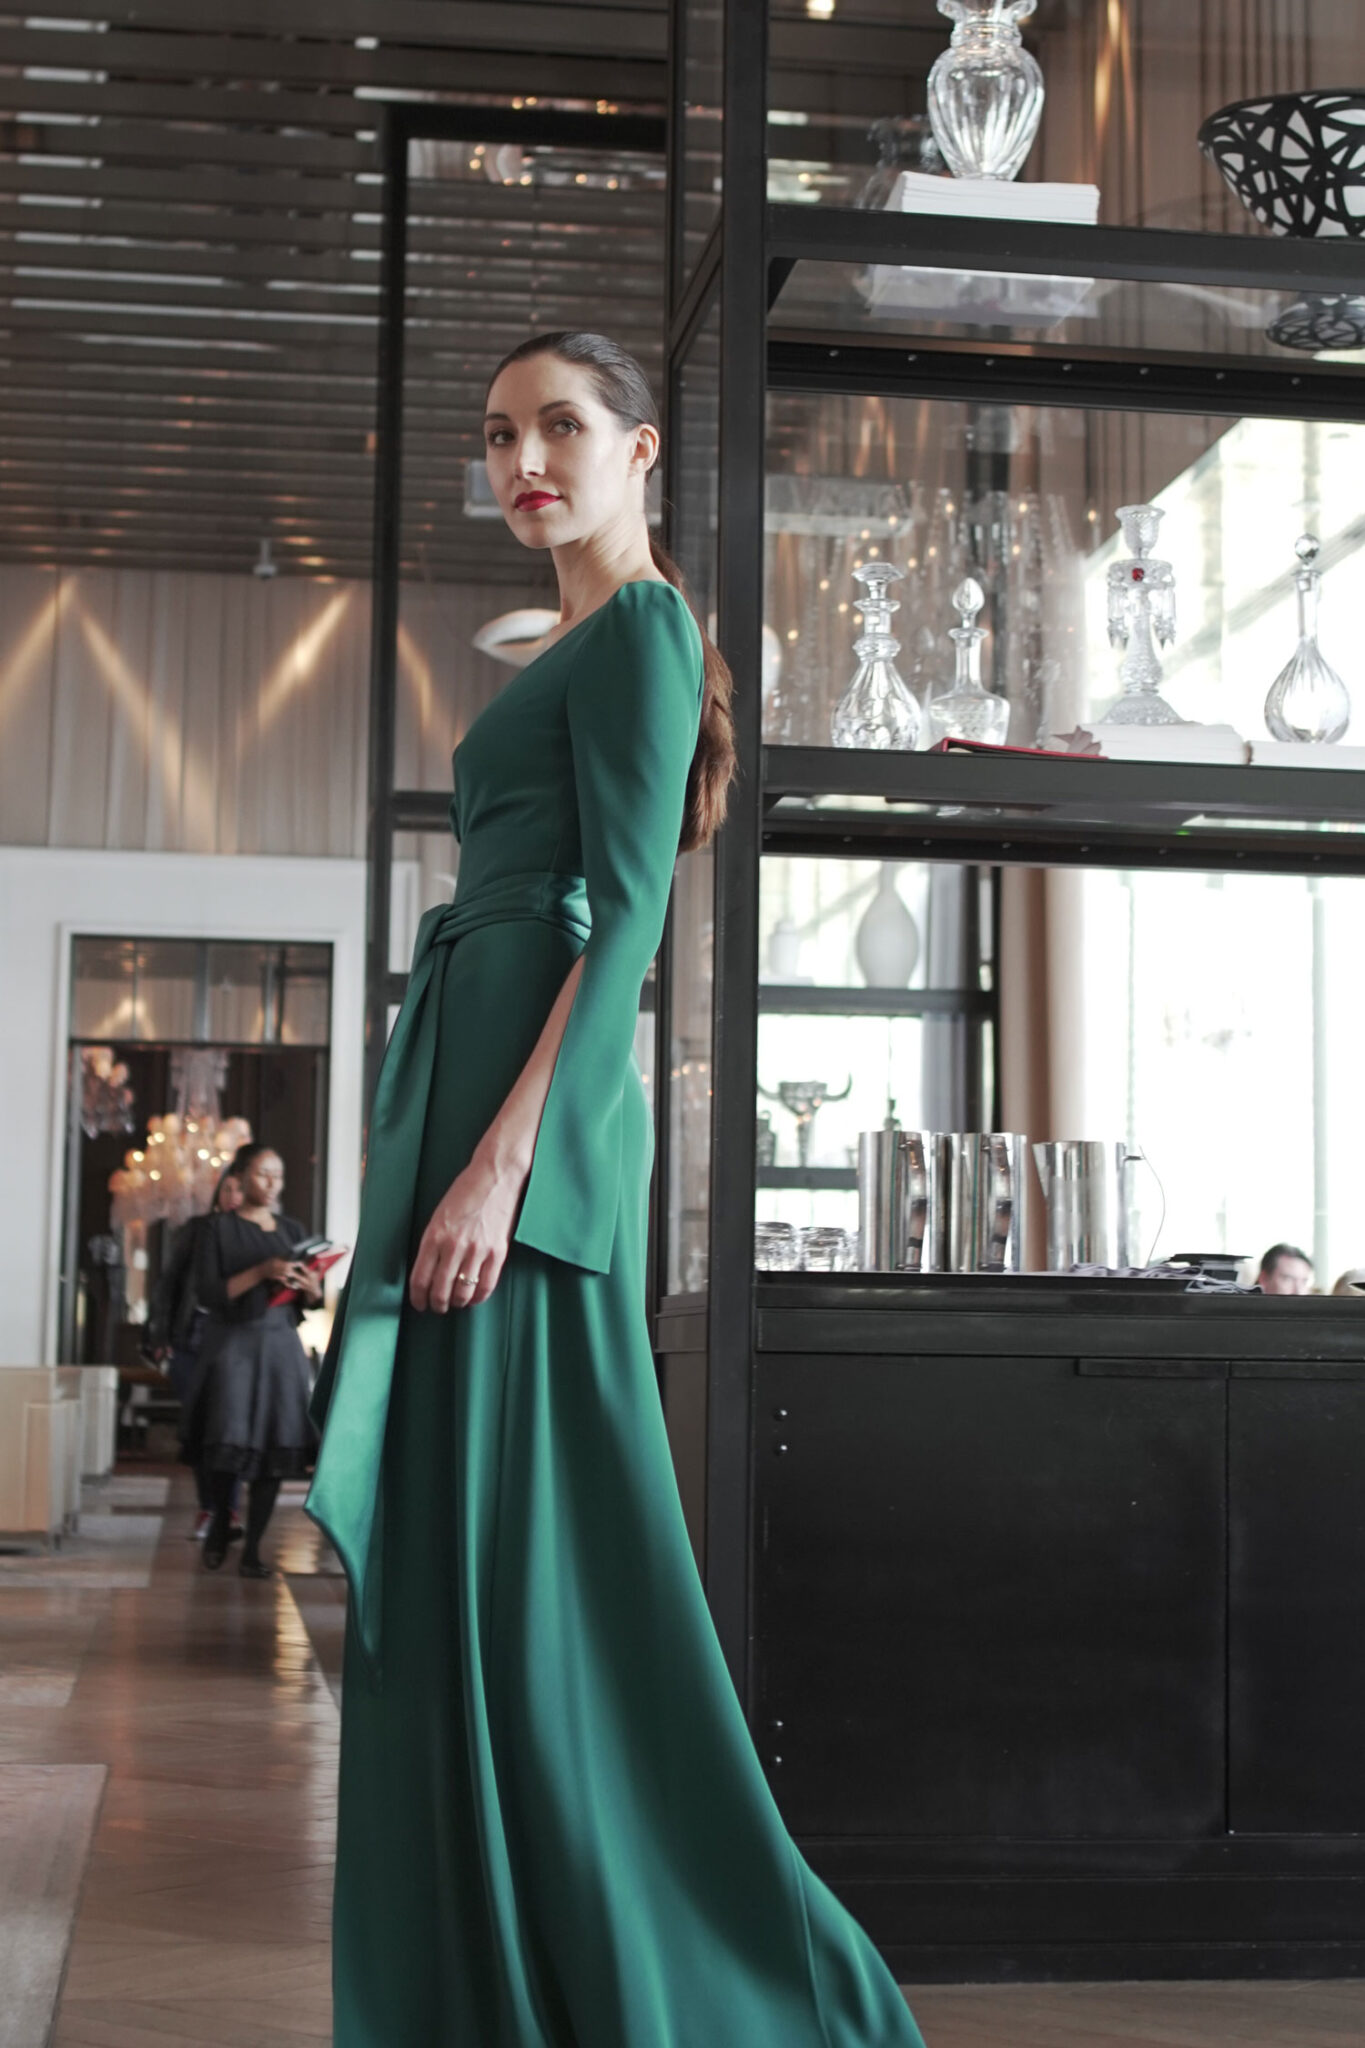 wrap style dress with long sleeves in green color - Fairytale collection - Look 1 - Verdin New york